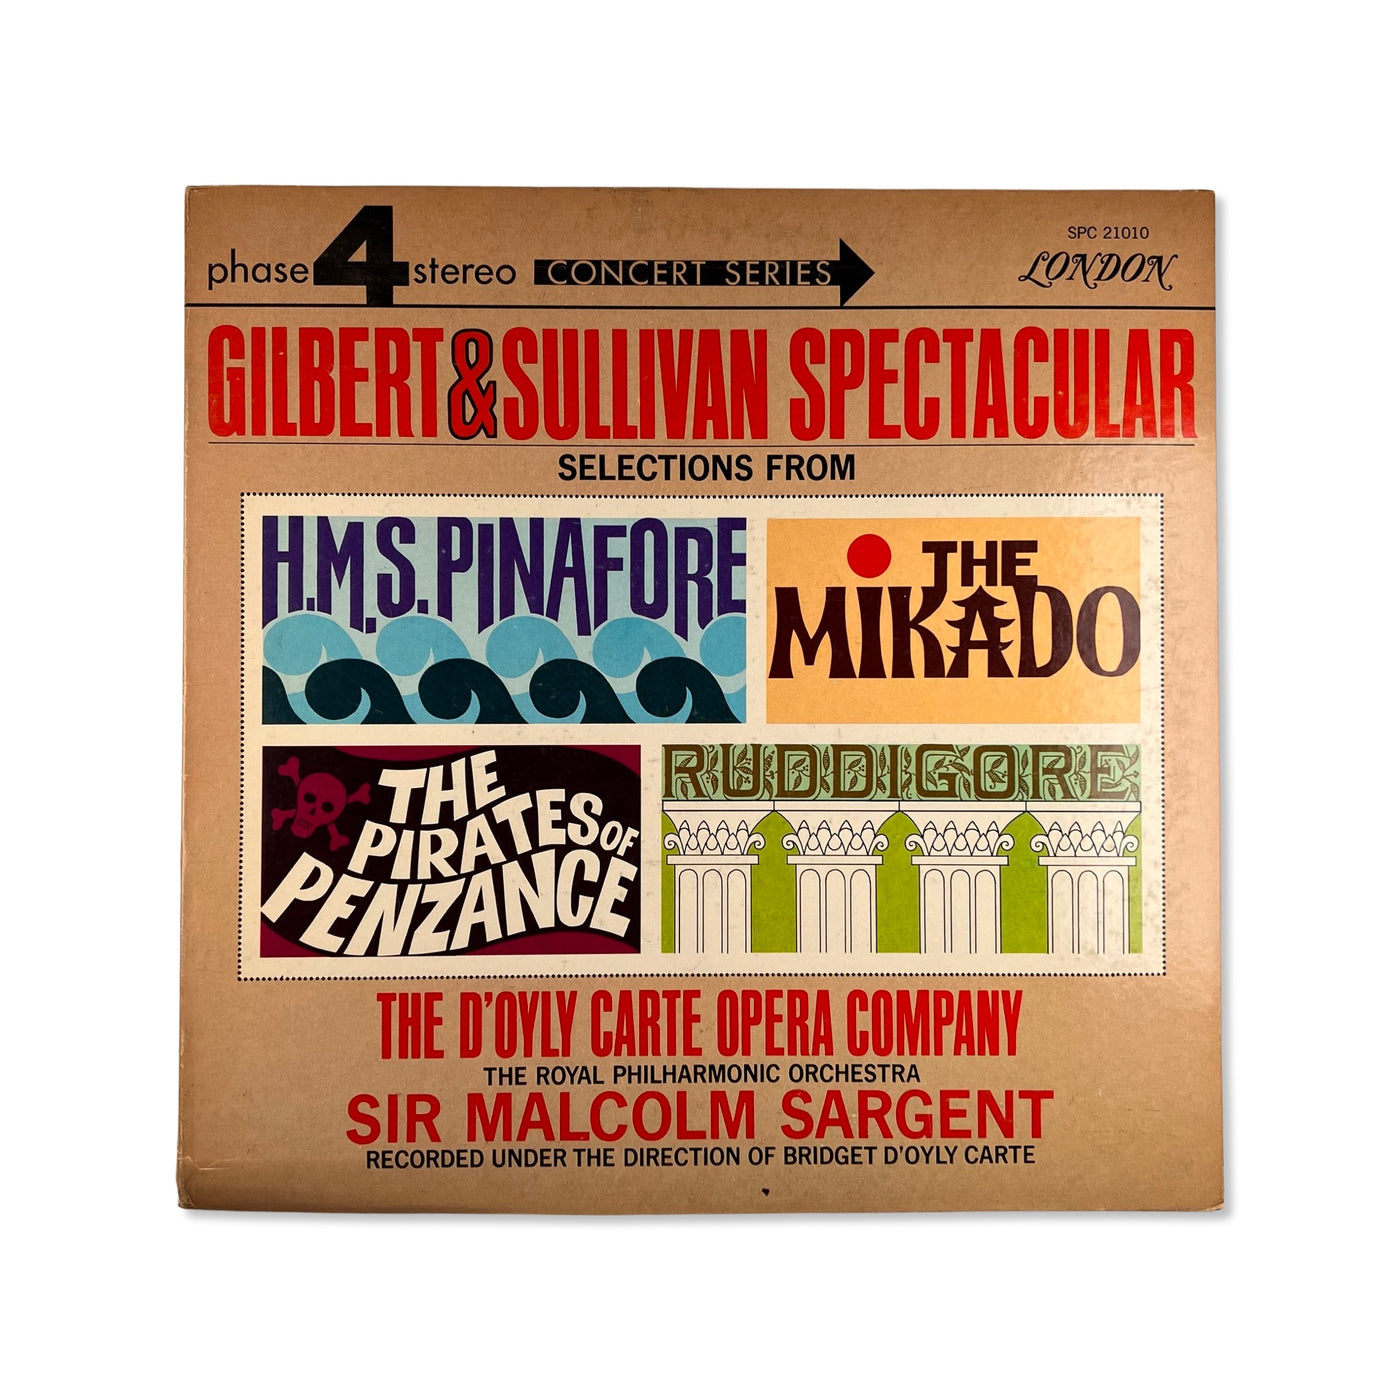 The Royal Philharmonic Orchestra Conducted By Sir Malcolm Sargent And The D'Oyly Carte Opera Company And Chorus*, Gilbert And Sullivan* – Gilbert & Sullivan Spectacular - Selections From H. M. S. Pinafore, The Mikado, The Pirates Of Penzance And Ruddigore